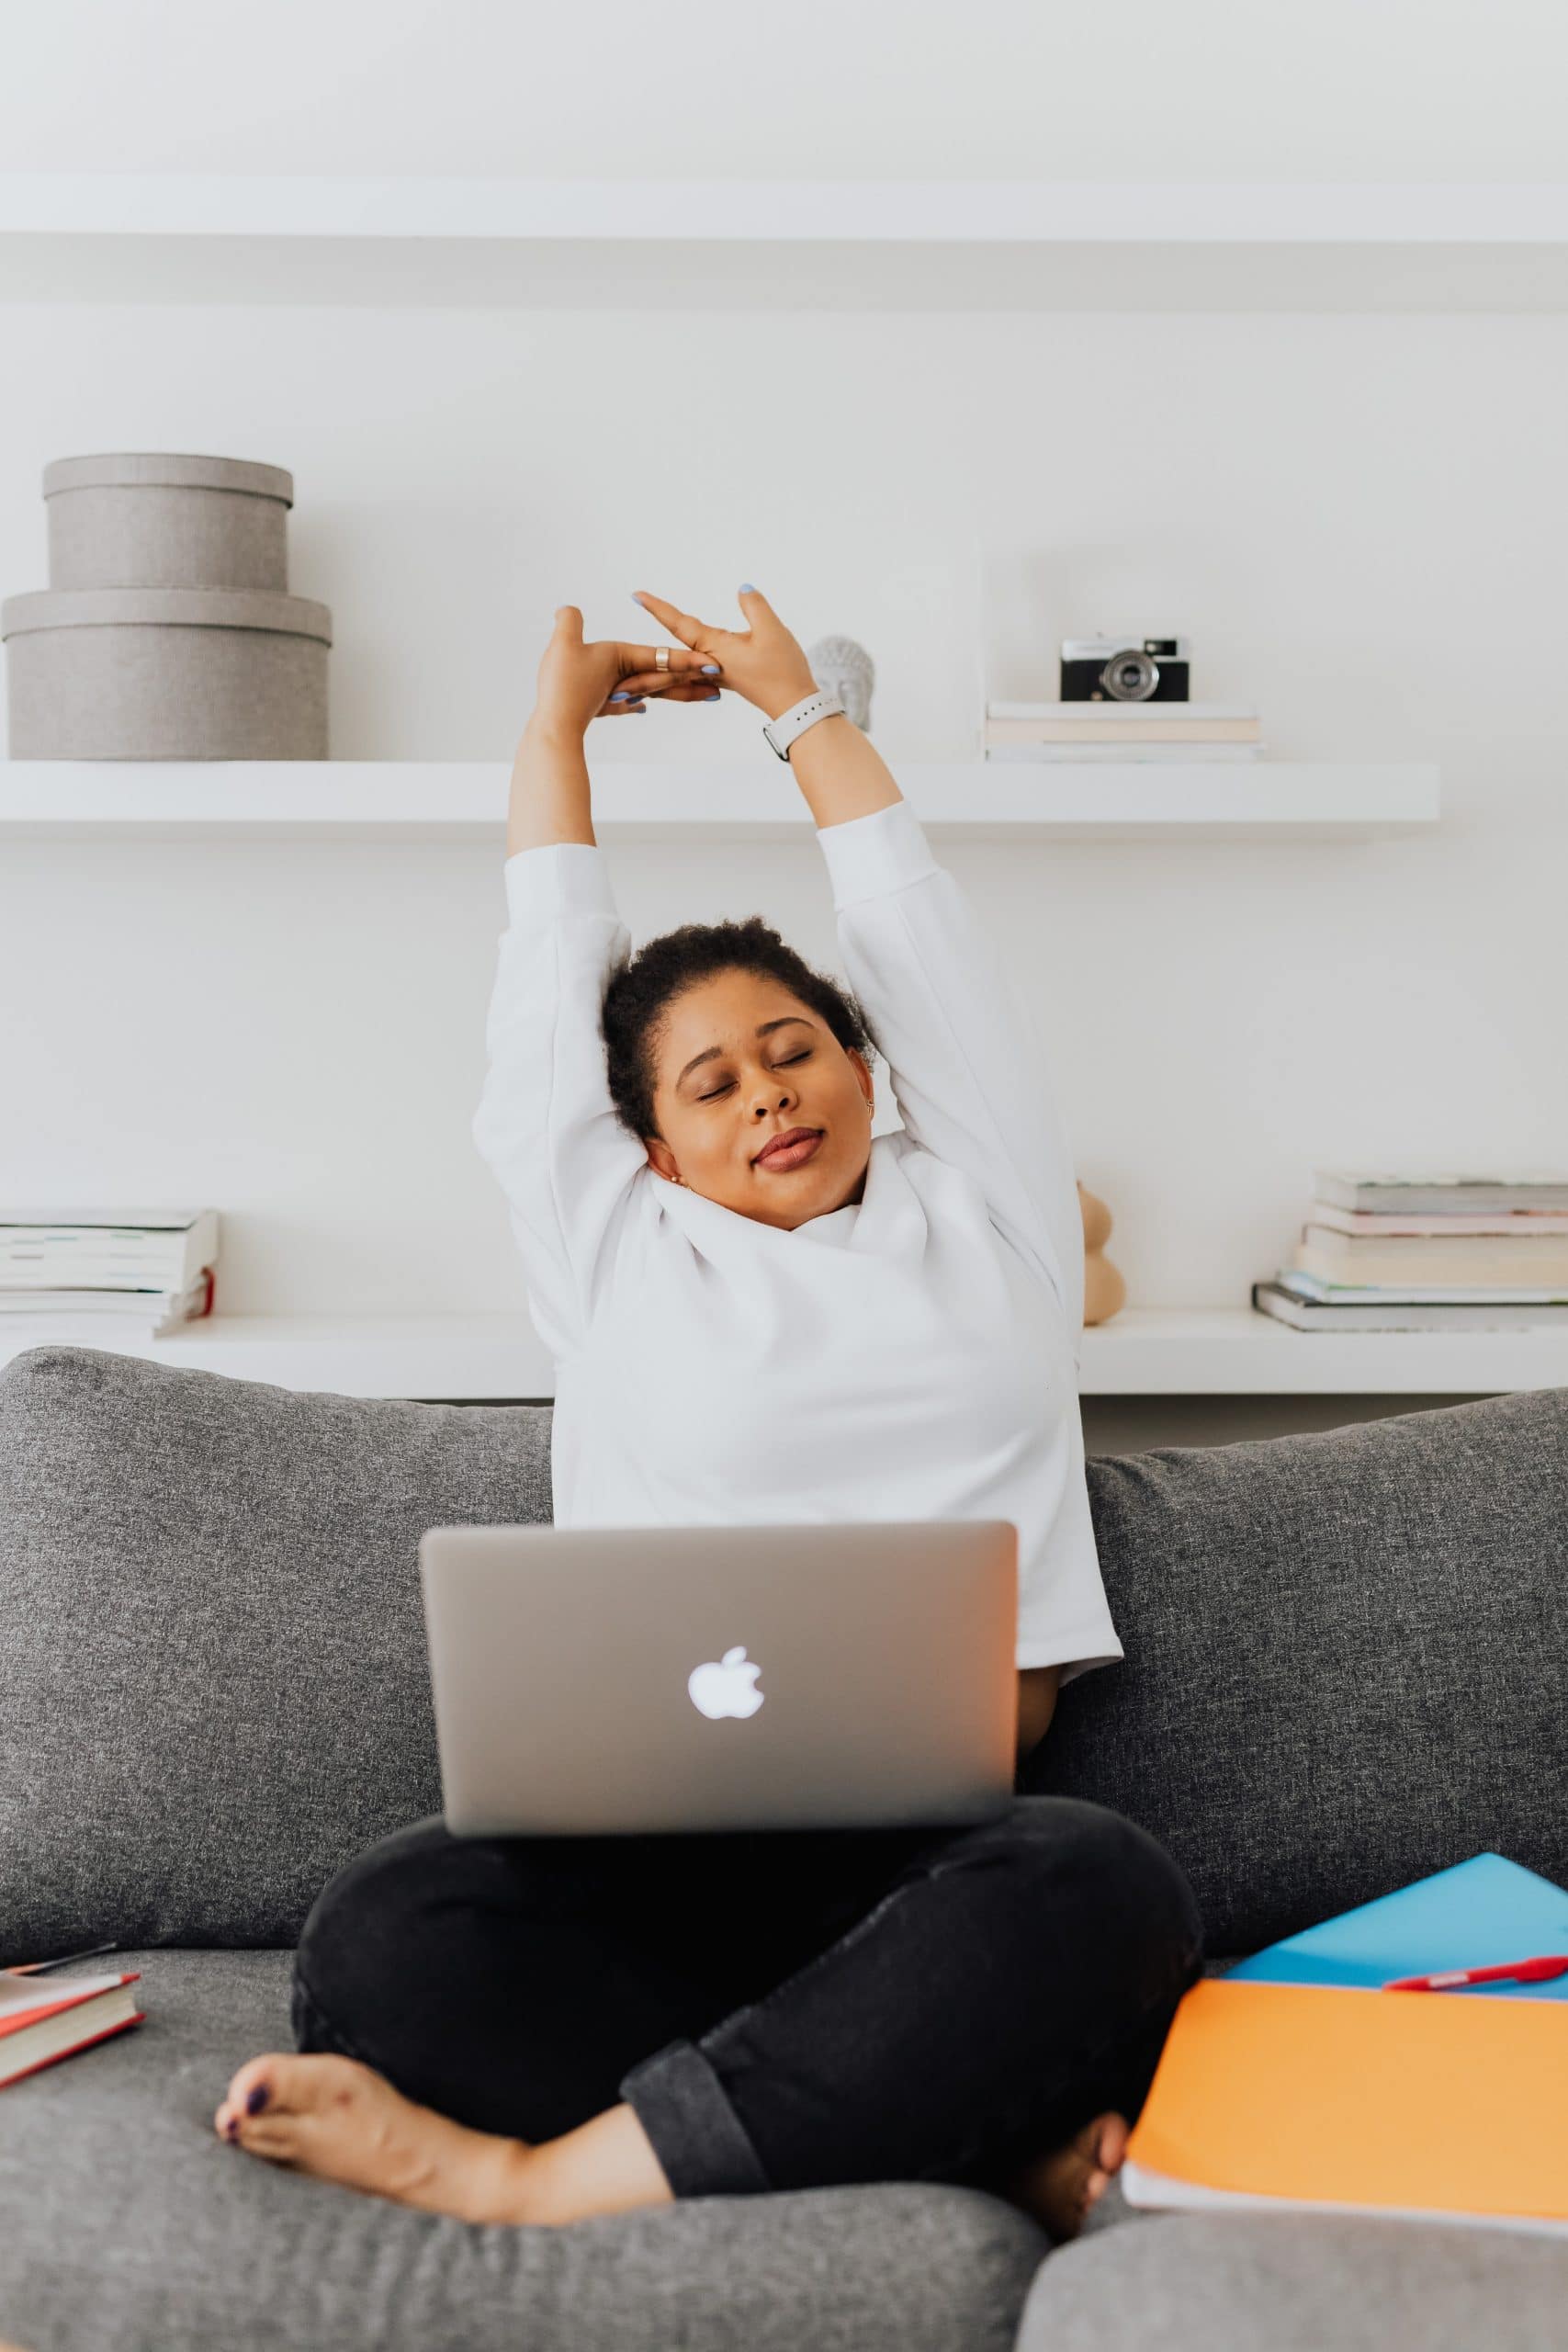 A Filipinx woman working from home with a laptop on the couch. She has a slight smile on her face, eyes closed, and she is stretching overhead, as though she is taking a mindfulness or yoga break during the workday.